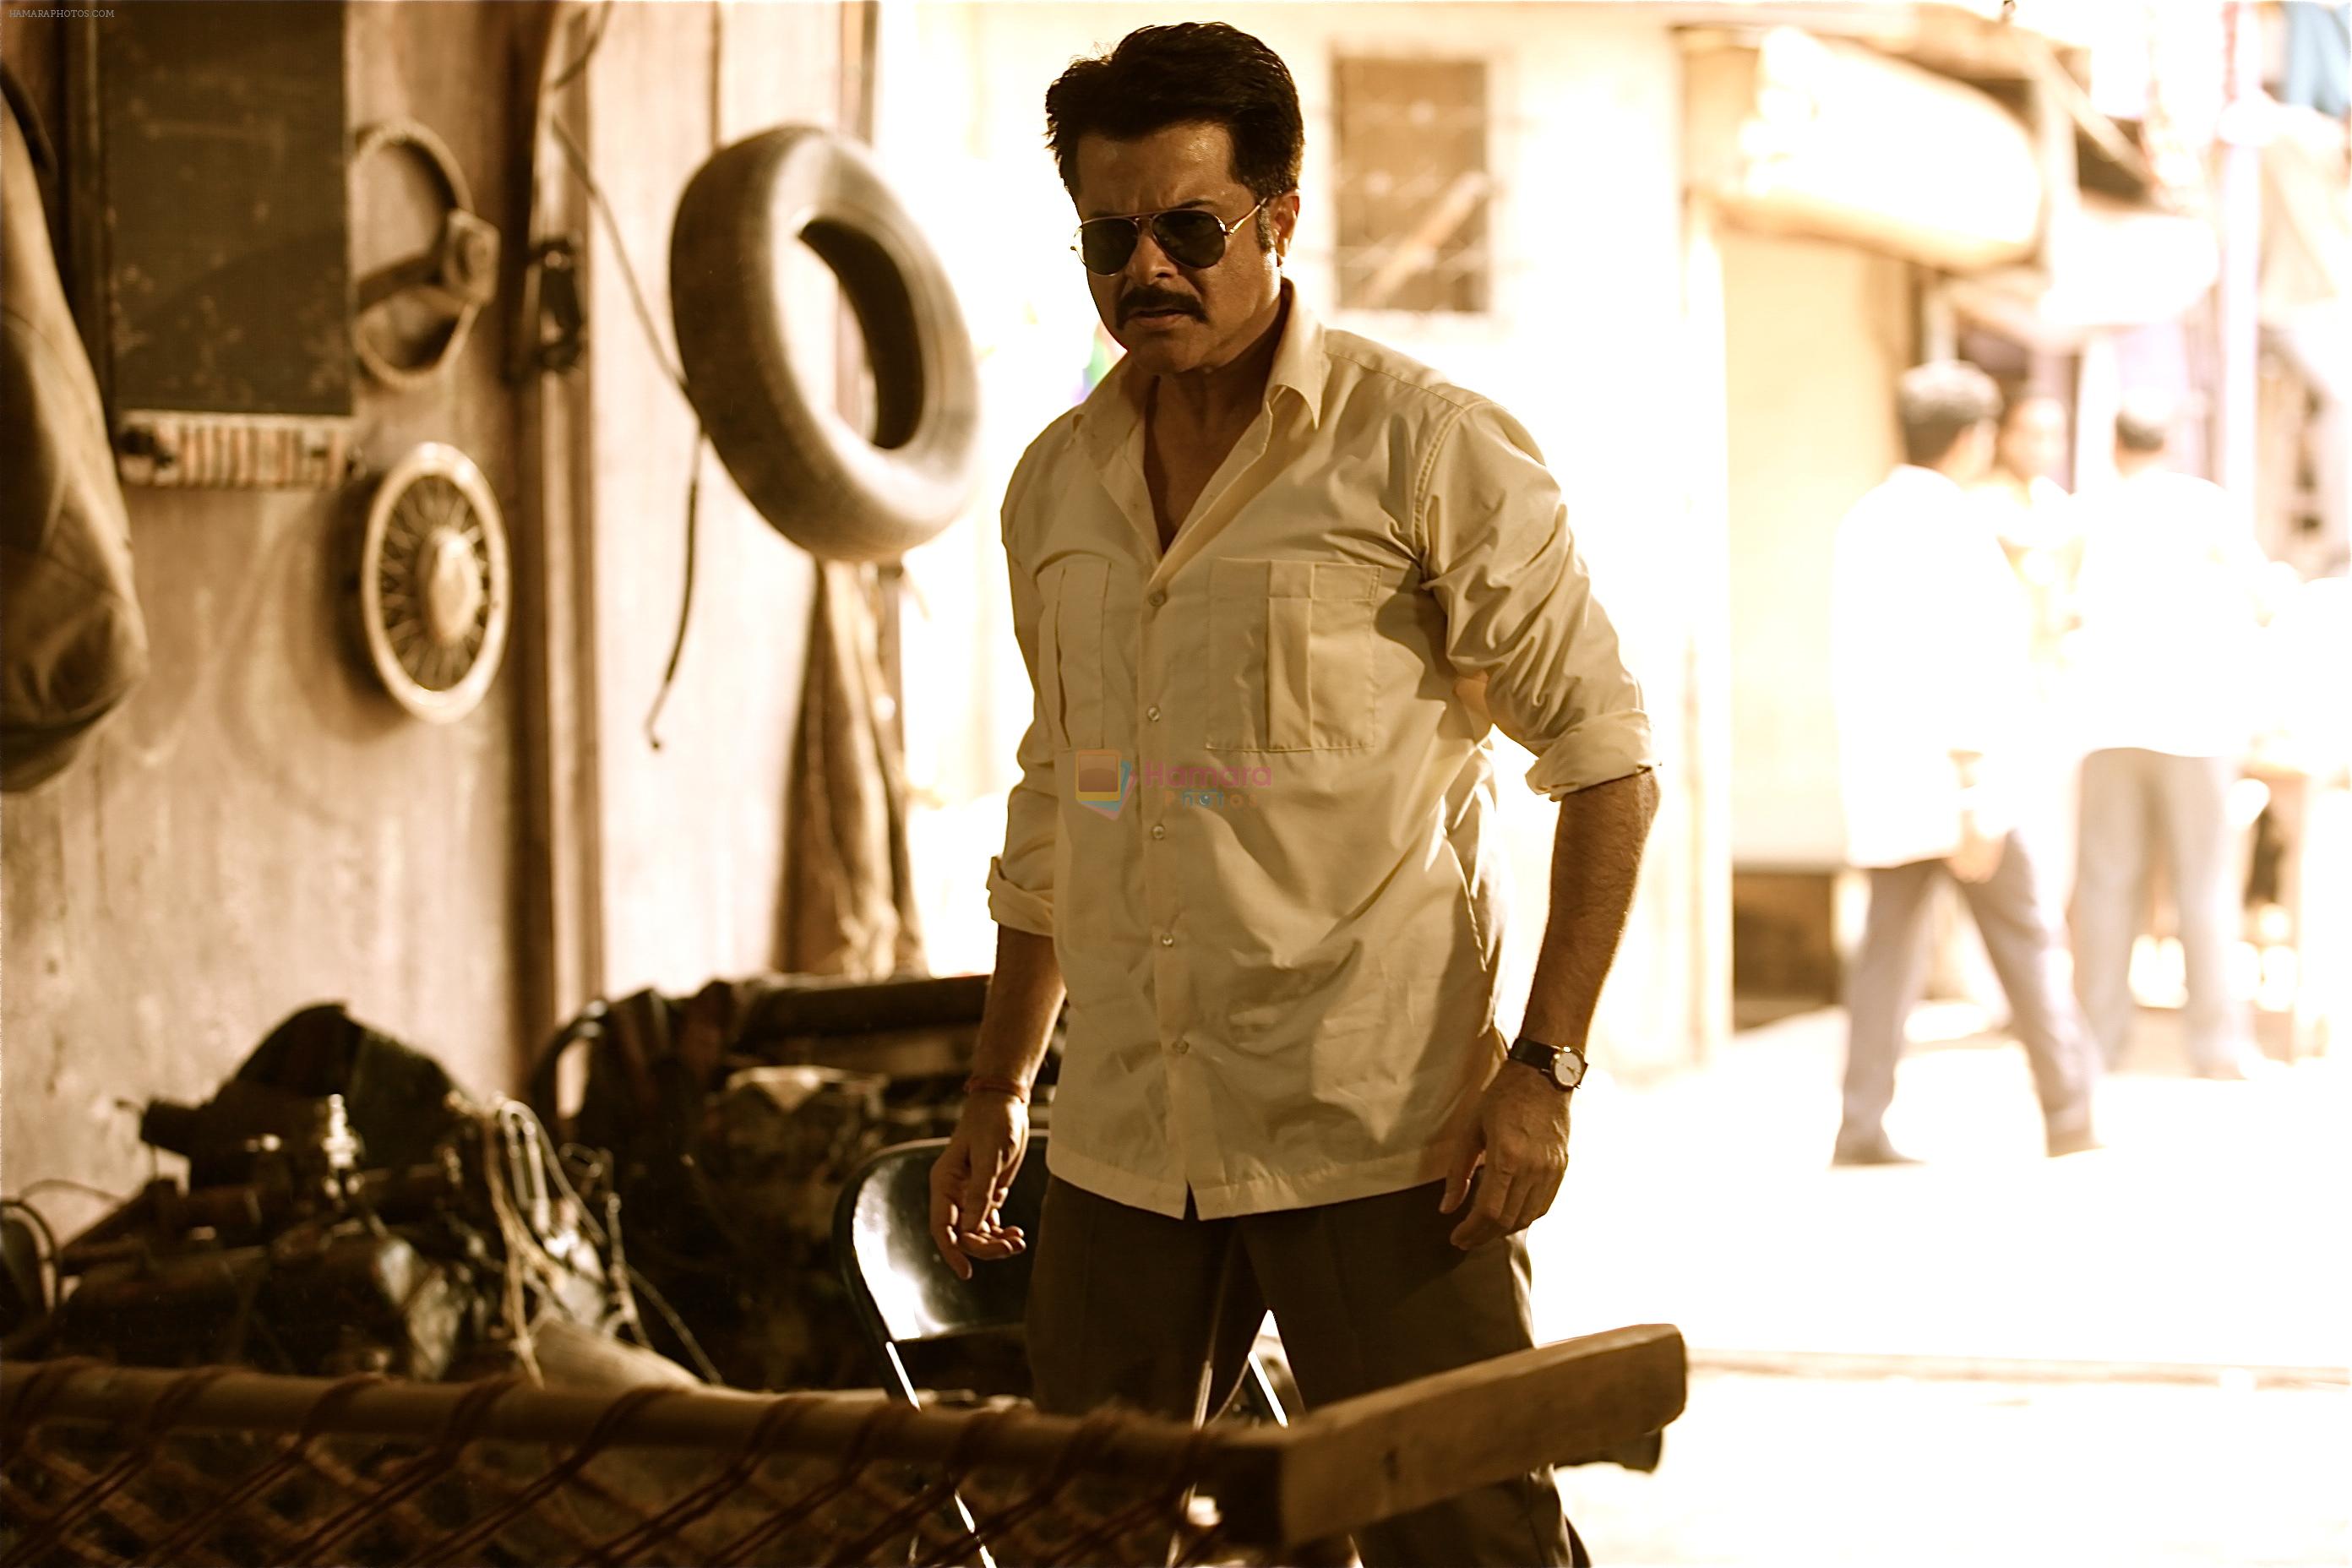 Anil Kapoor shoots for his career's finest scene in Balaji�s Shootout at Wadala